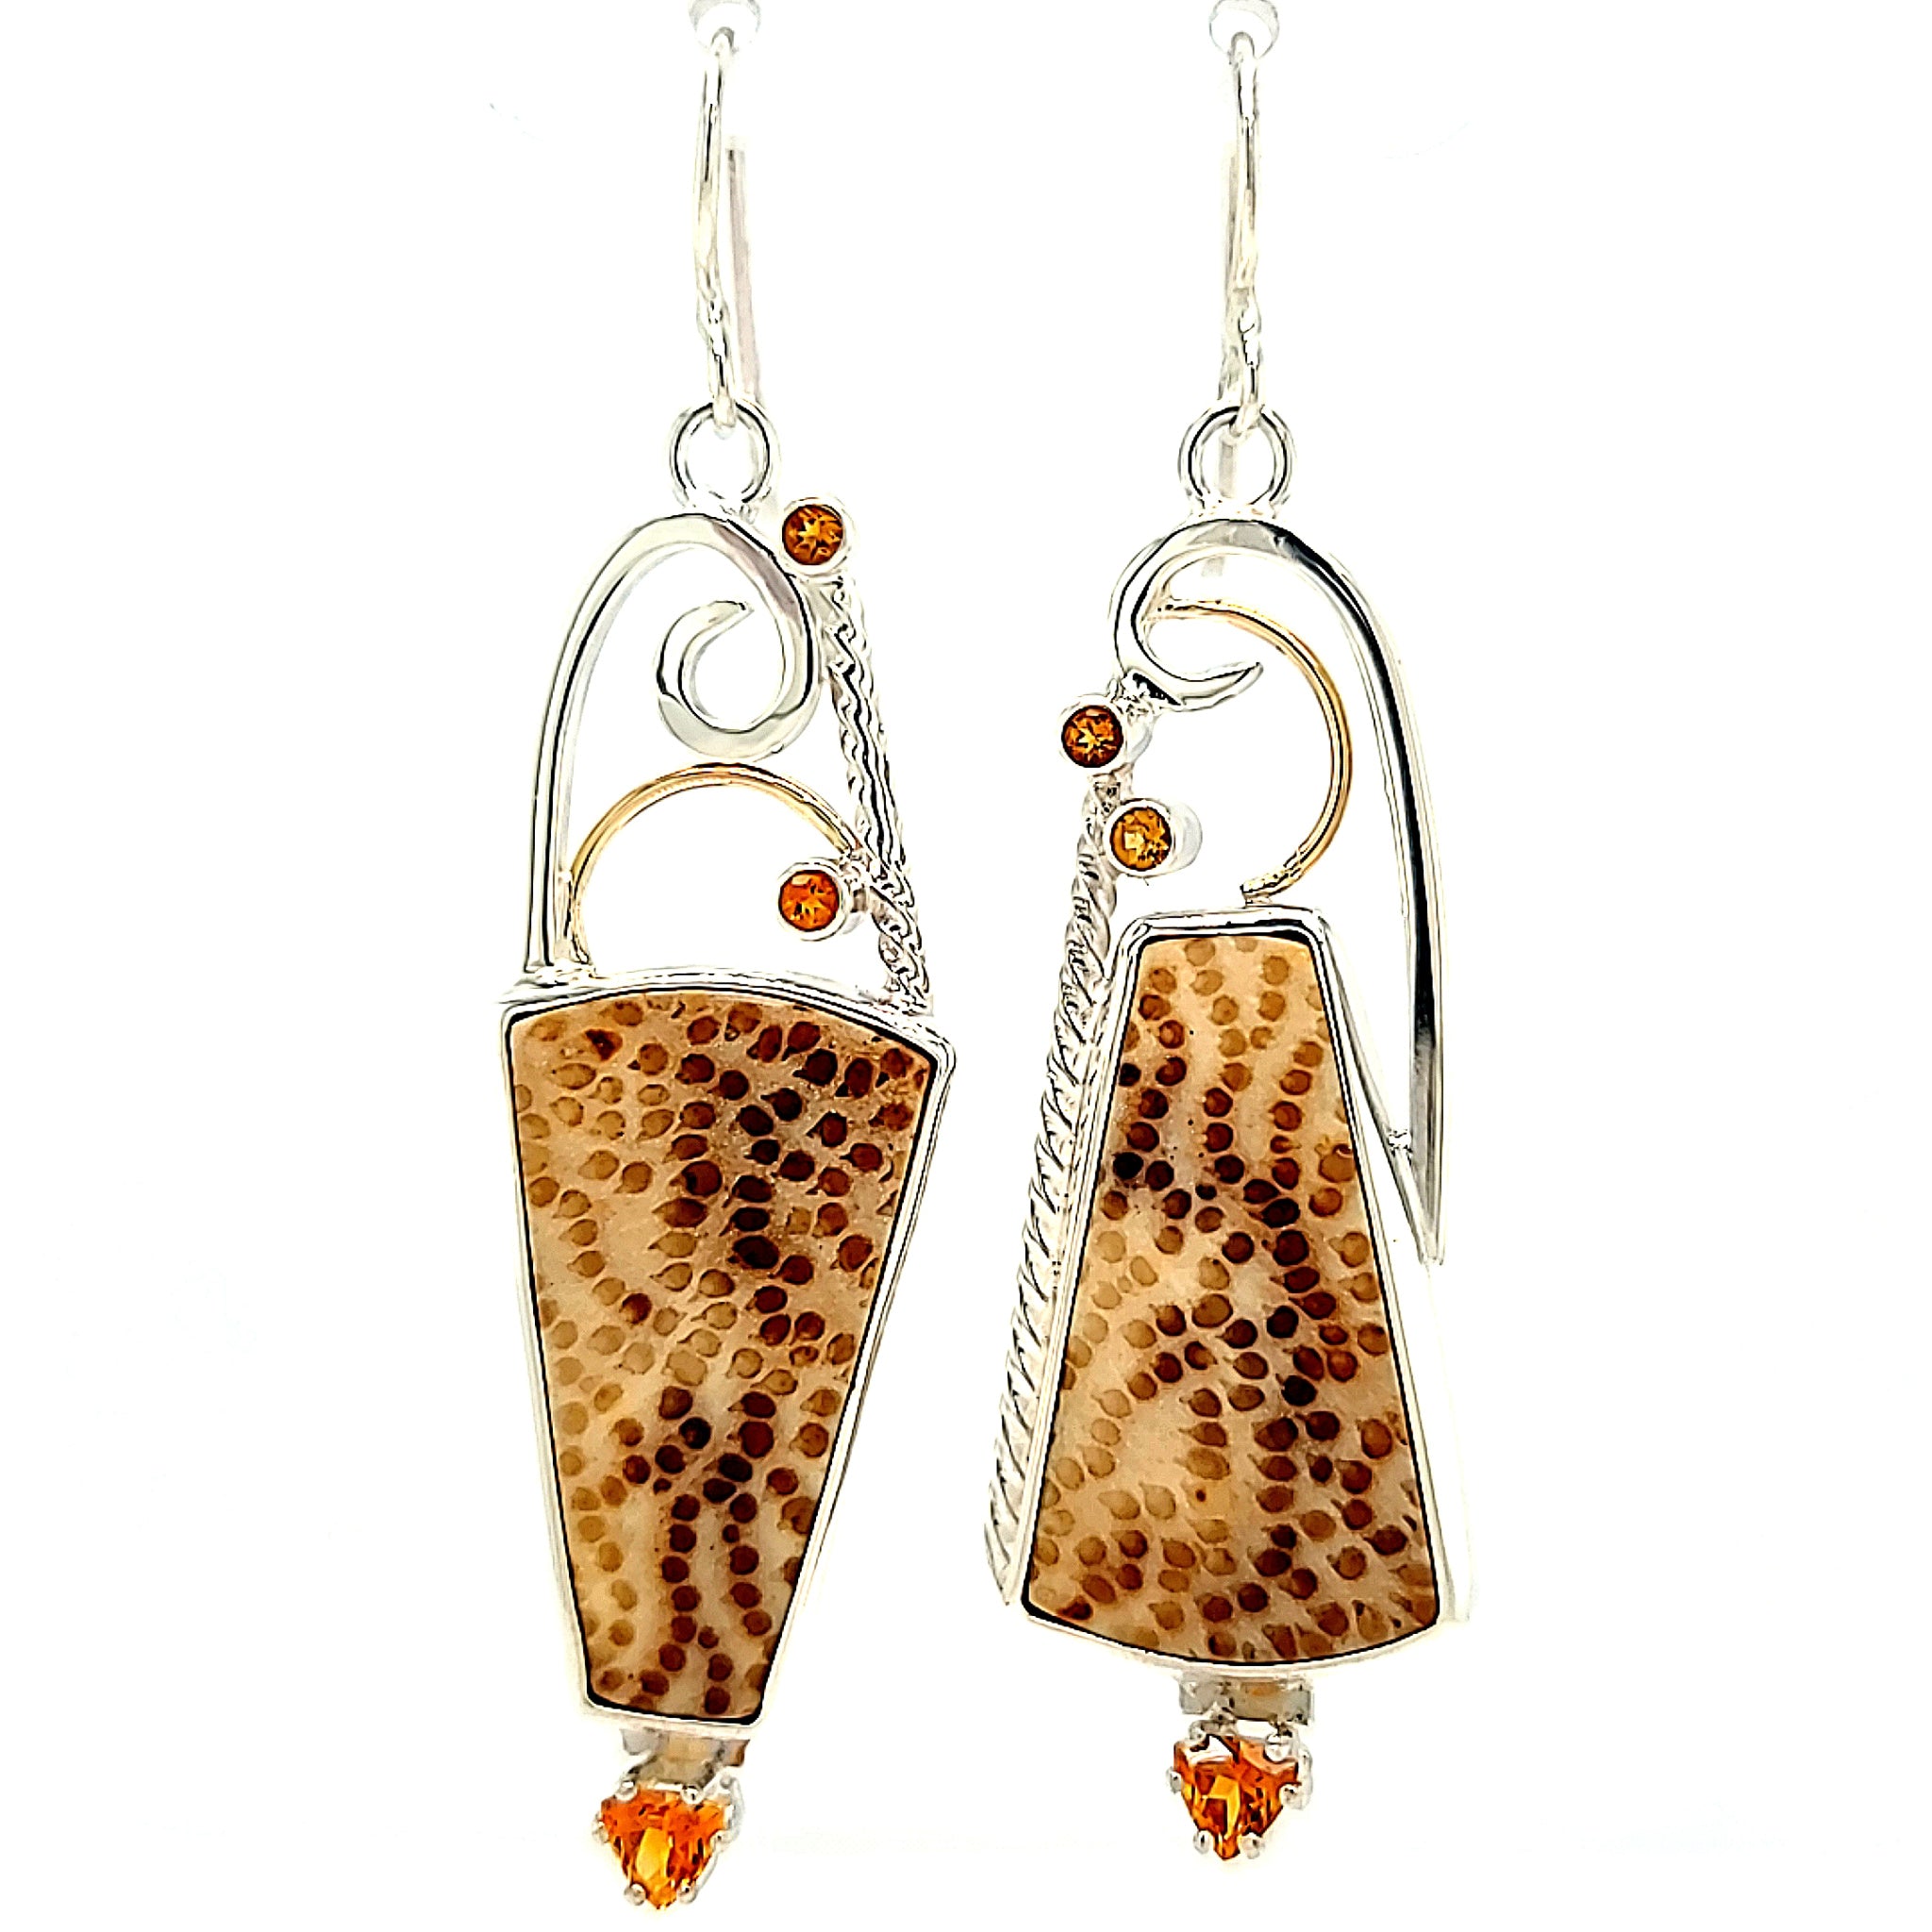 Asymmetric Sterling silver earrings with Petrified Palmwood, Citrine and 18k Gold accents.